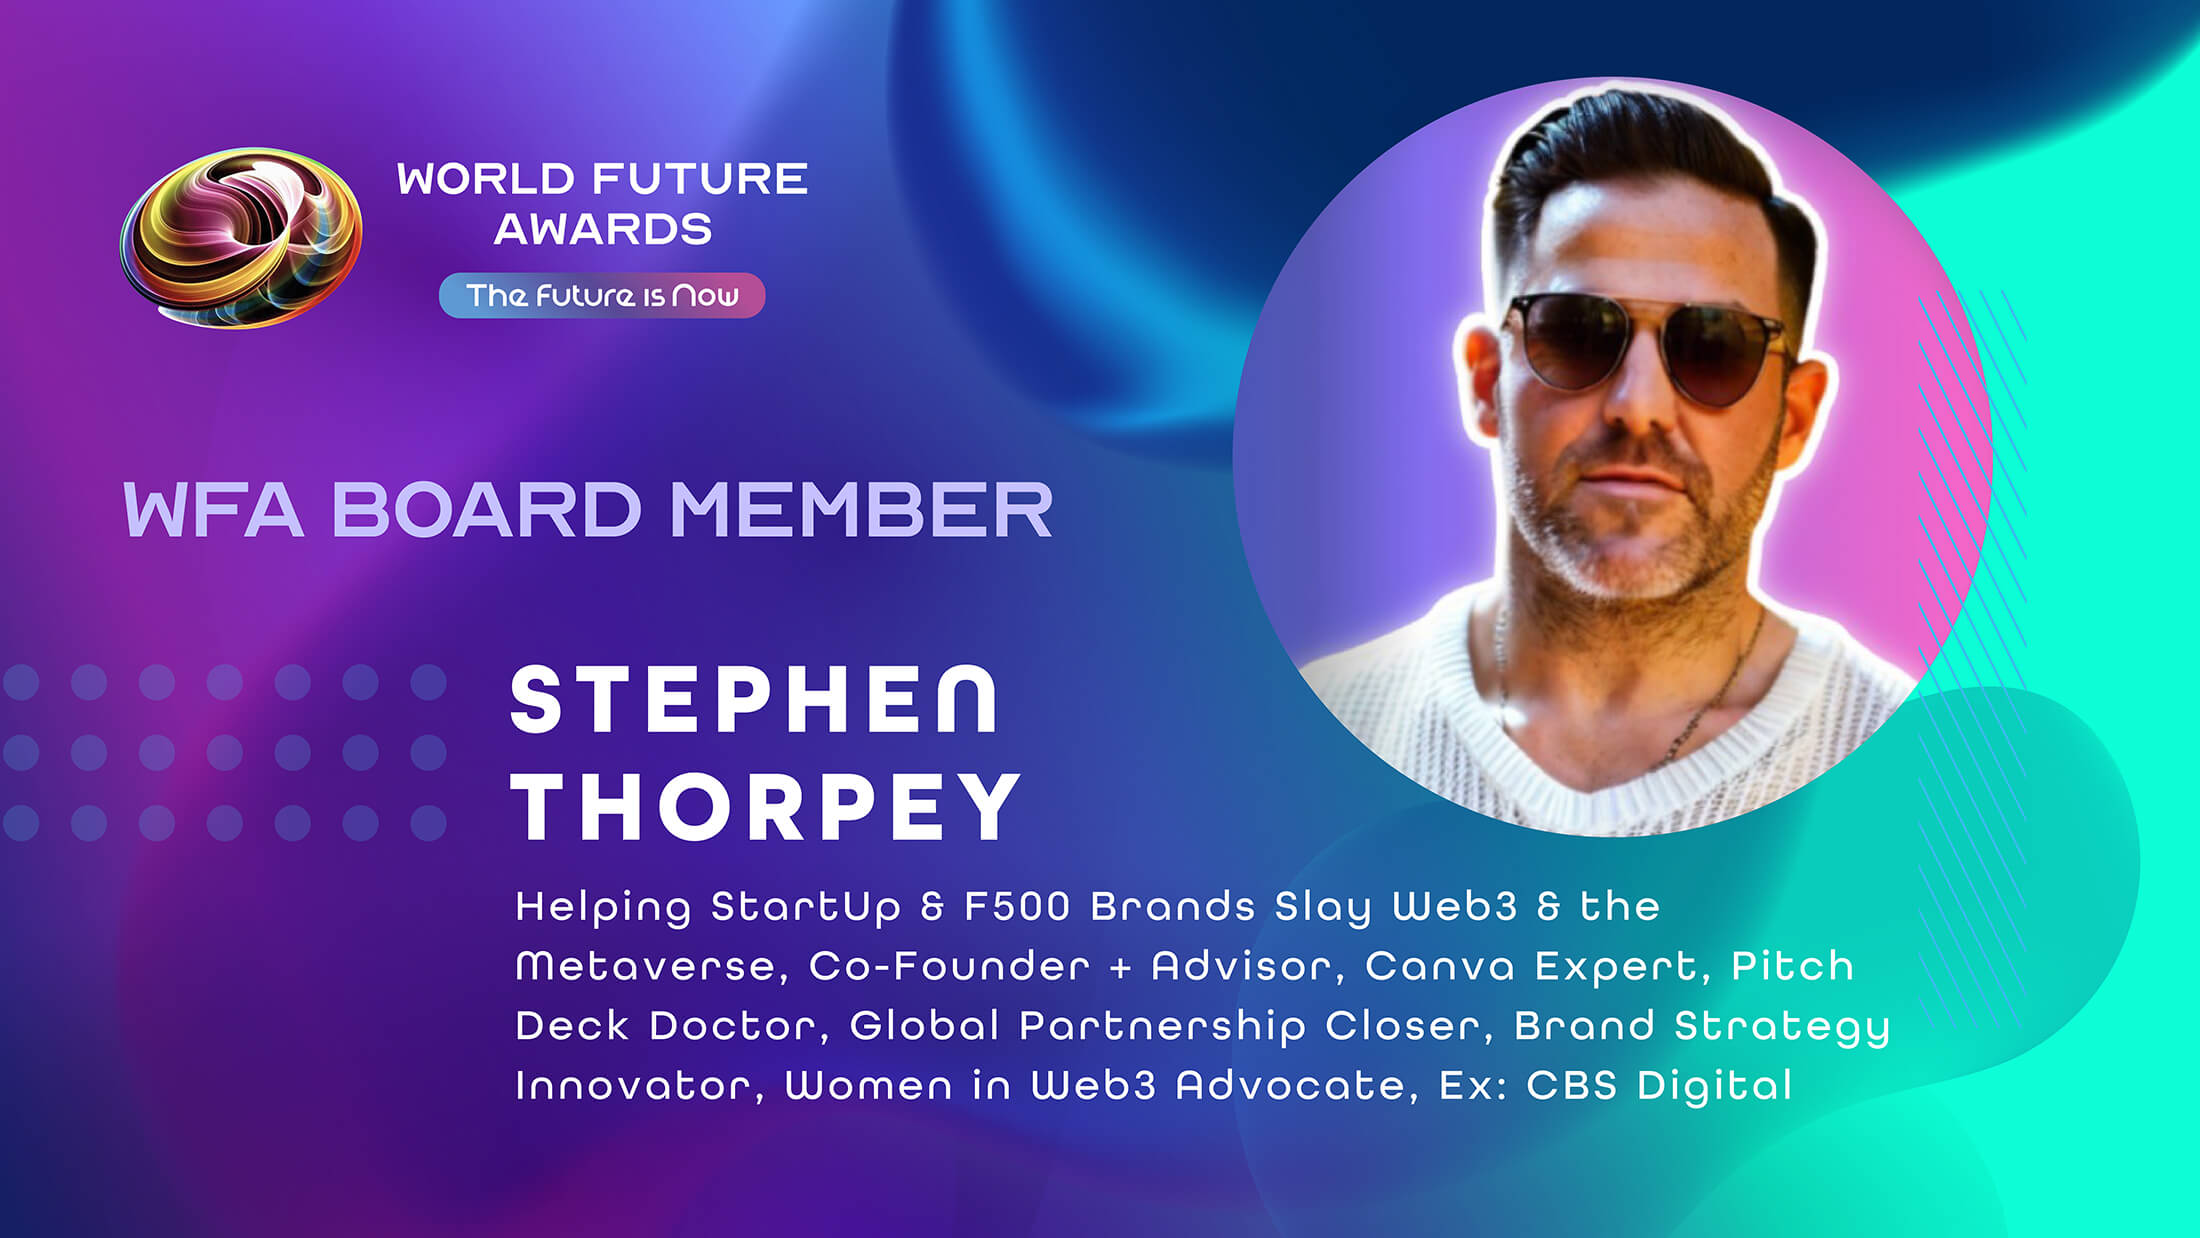 World Future Awards Gains Web3 Visionary Stephen Thorpey as Newest Board Member